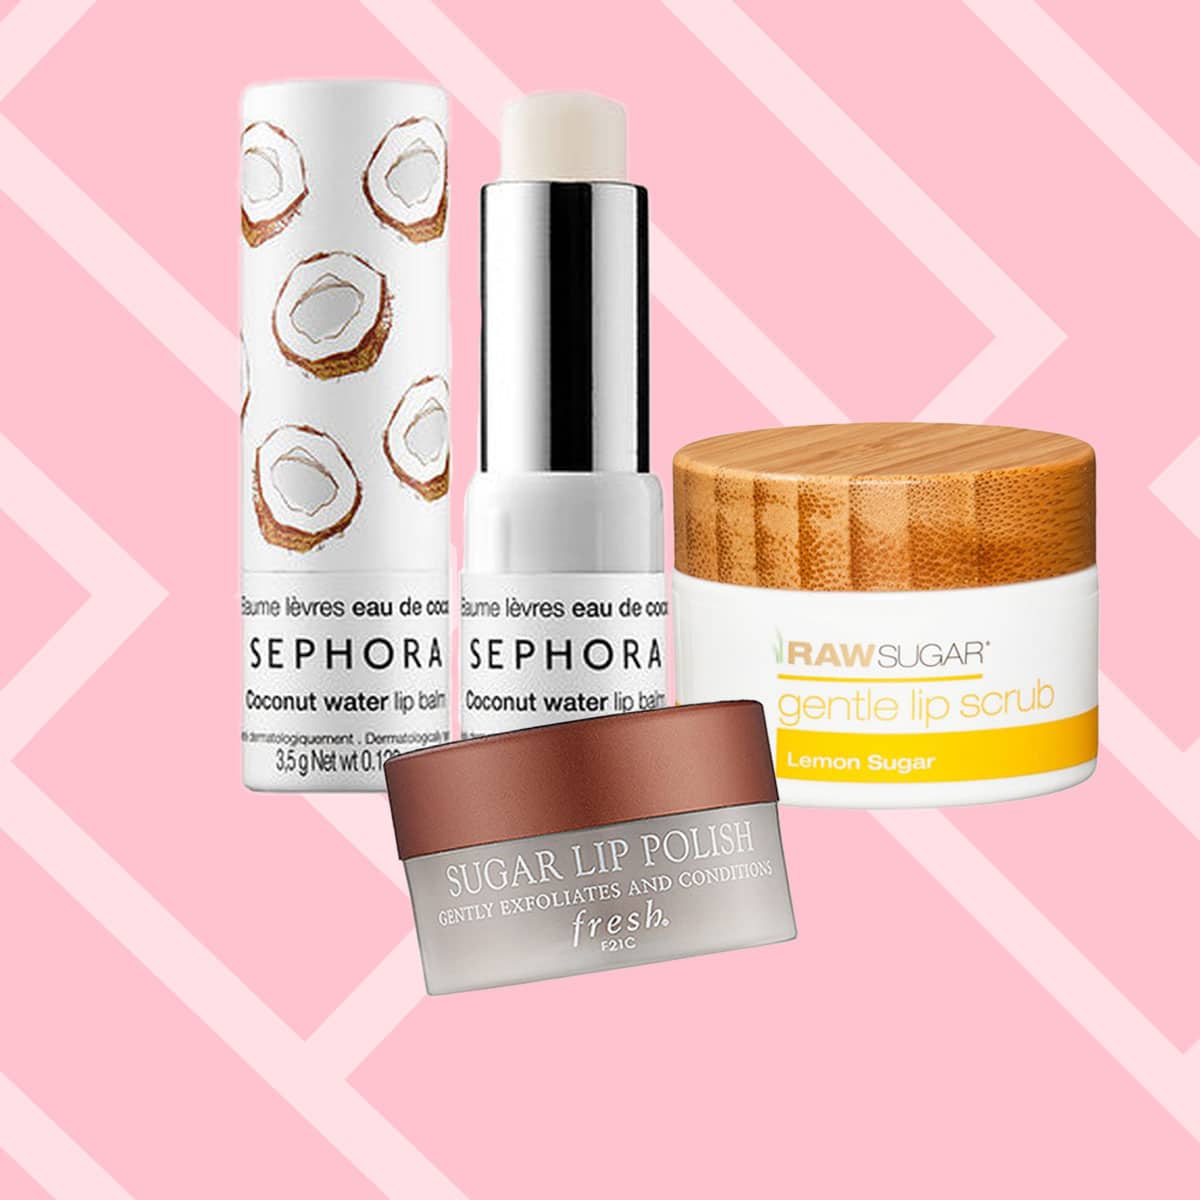 7 Scrubs That Will Restore Your Lips to Their Full Glory